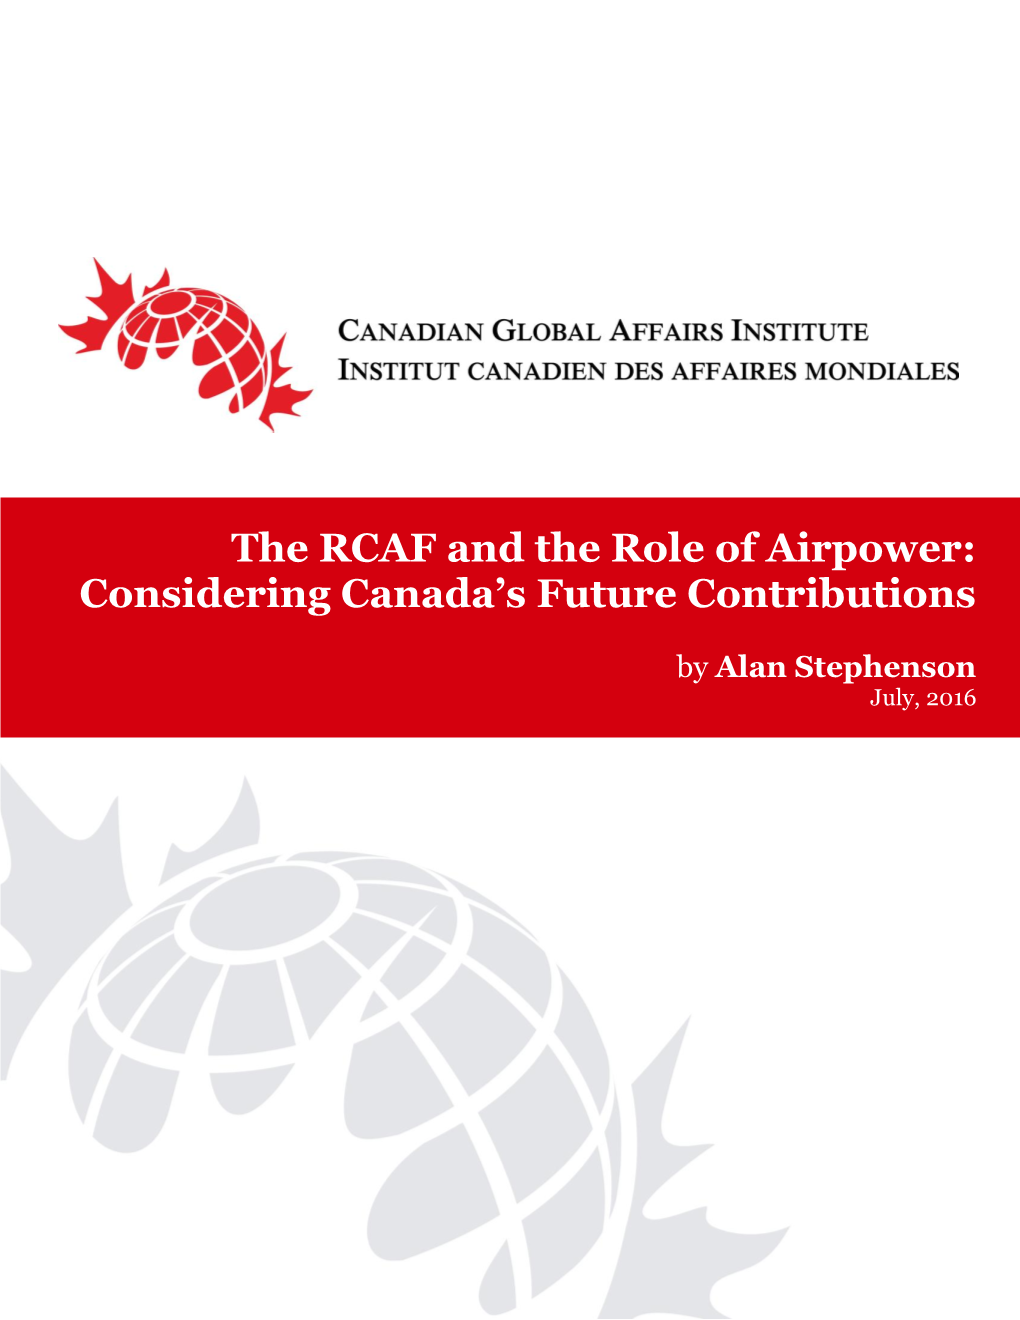 The RCAF and the Role of Airpower